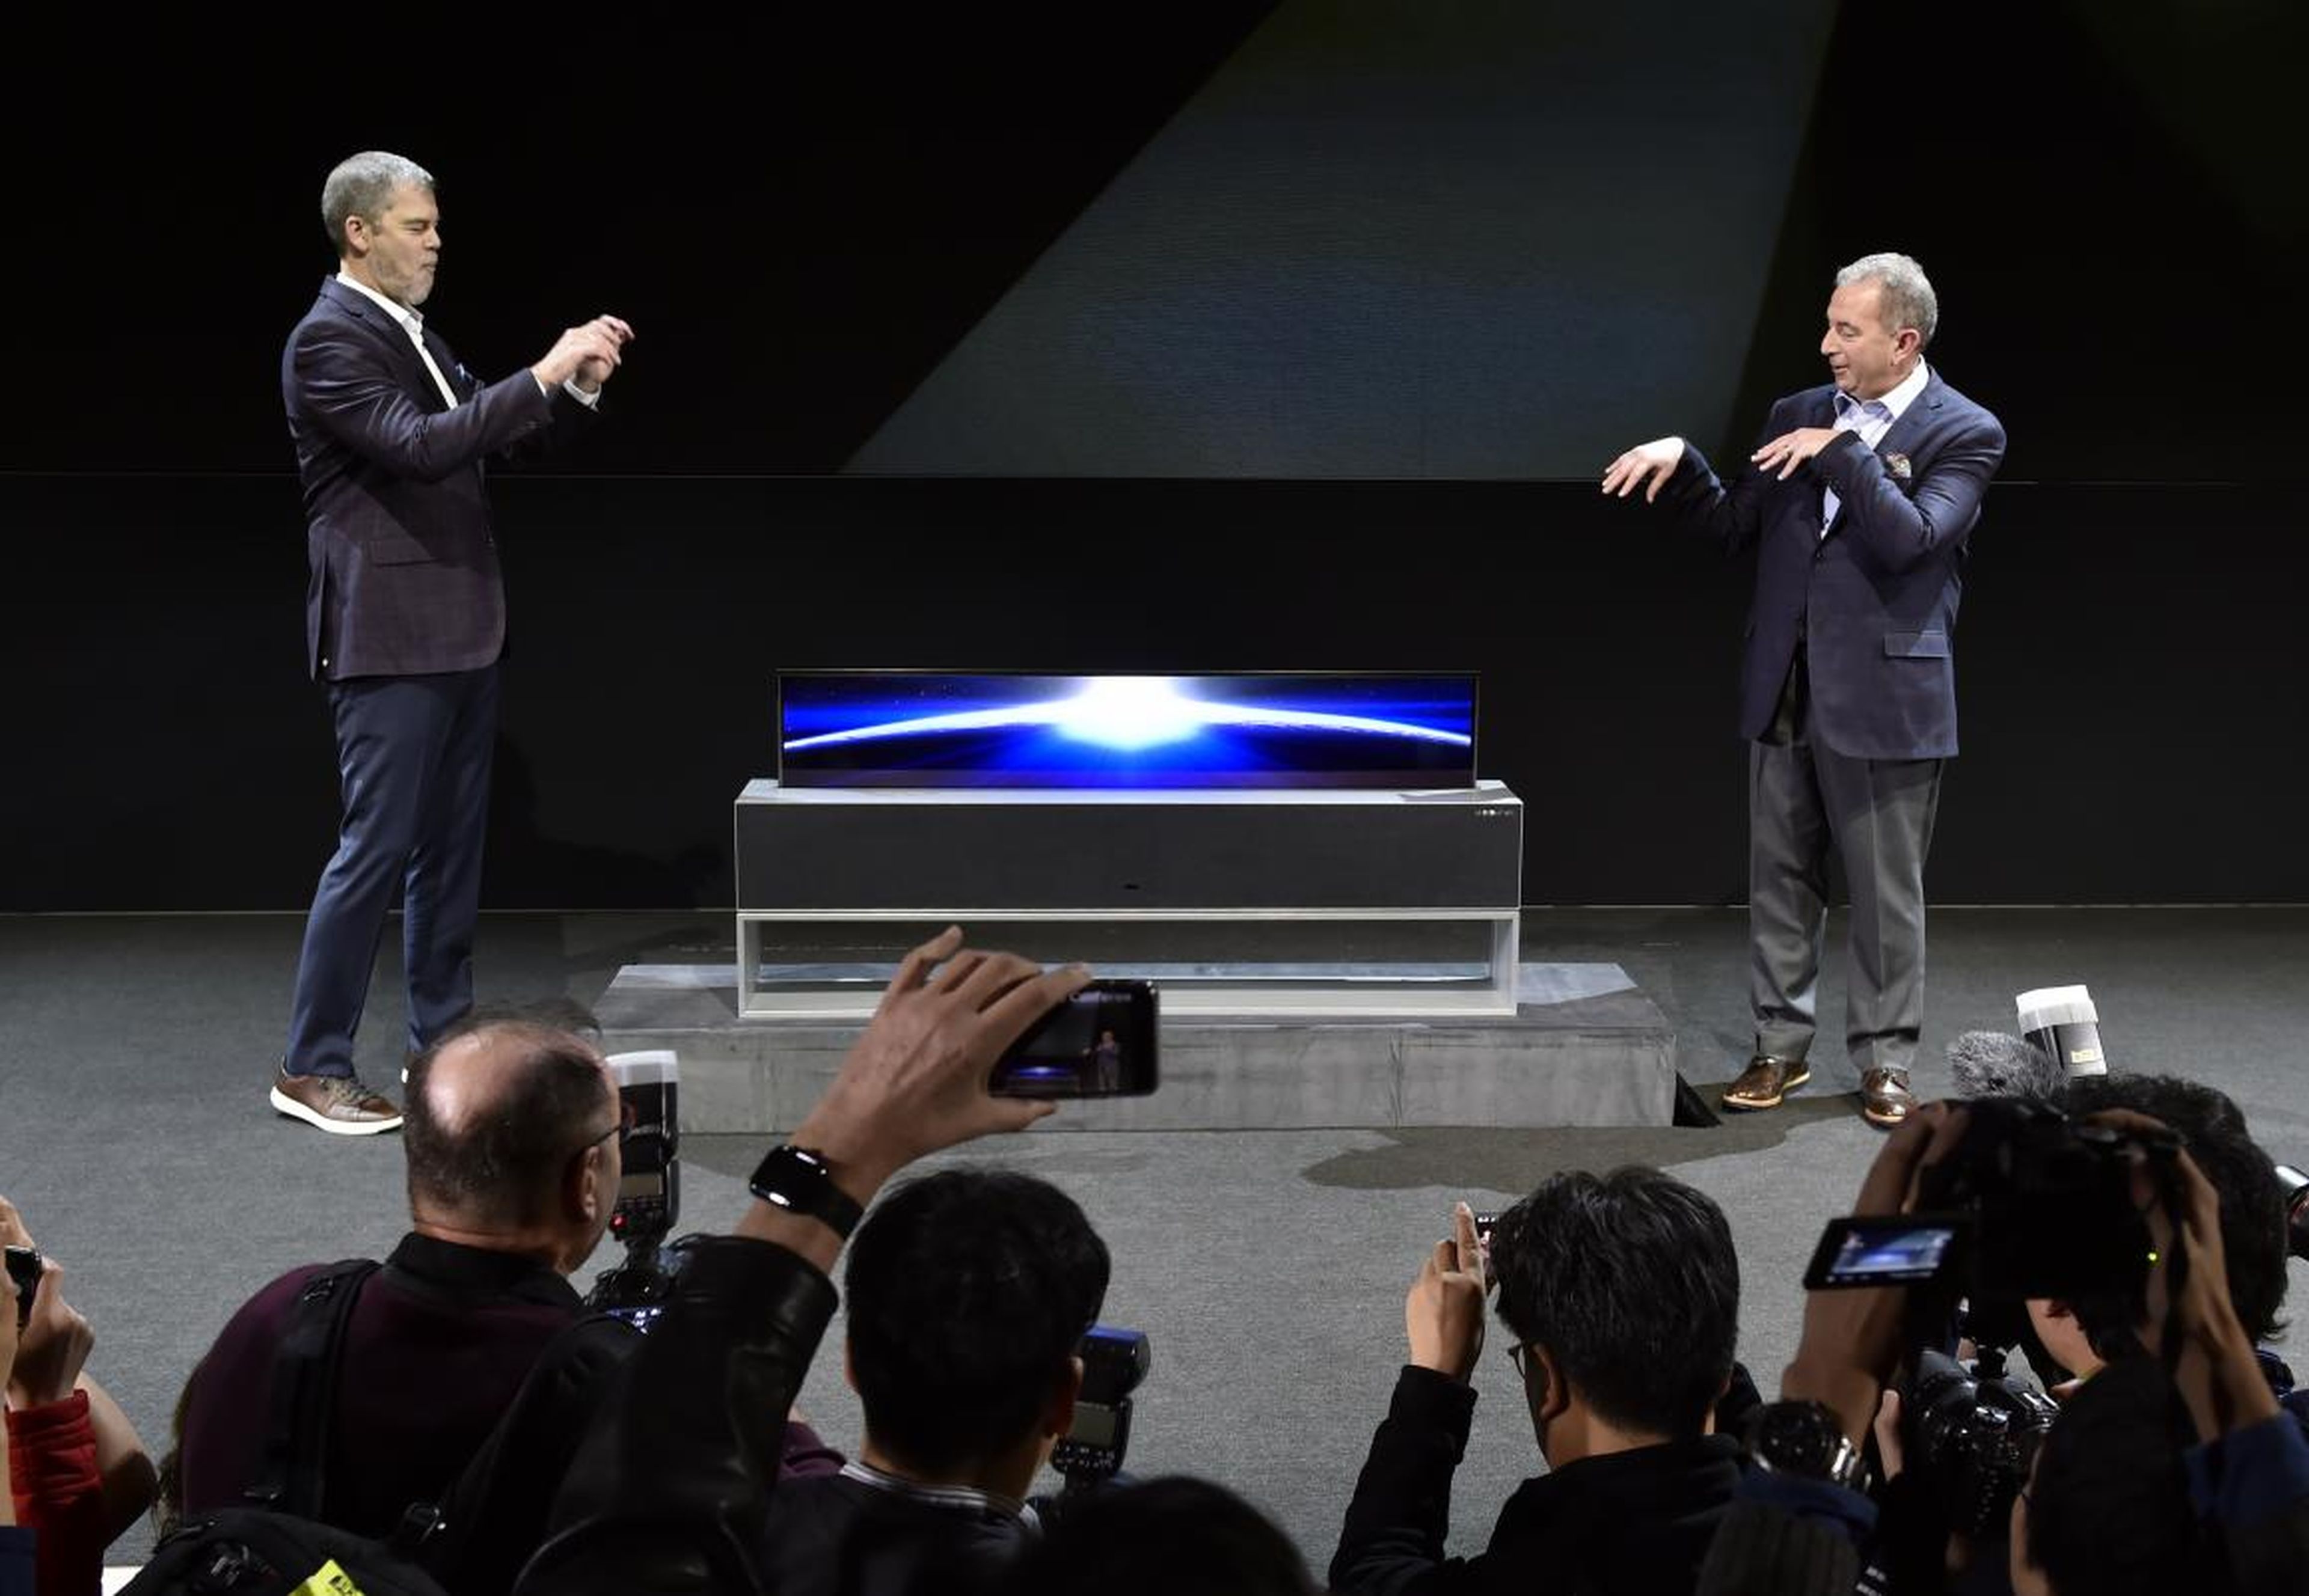 LG unveils its futuristic Signature OLED TV that rolls-up with the press of a button.